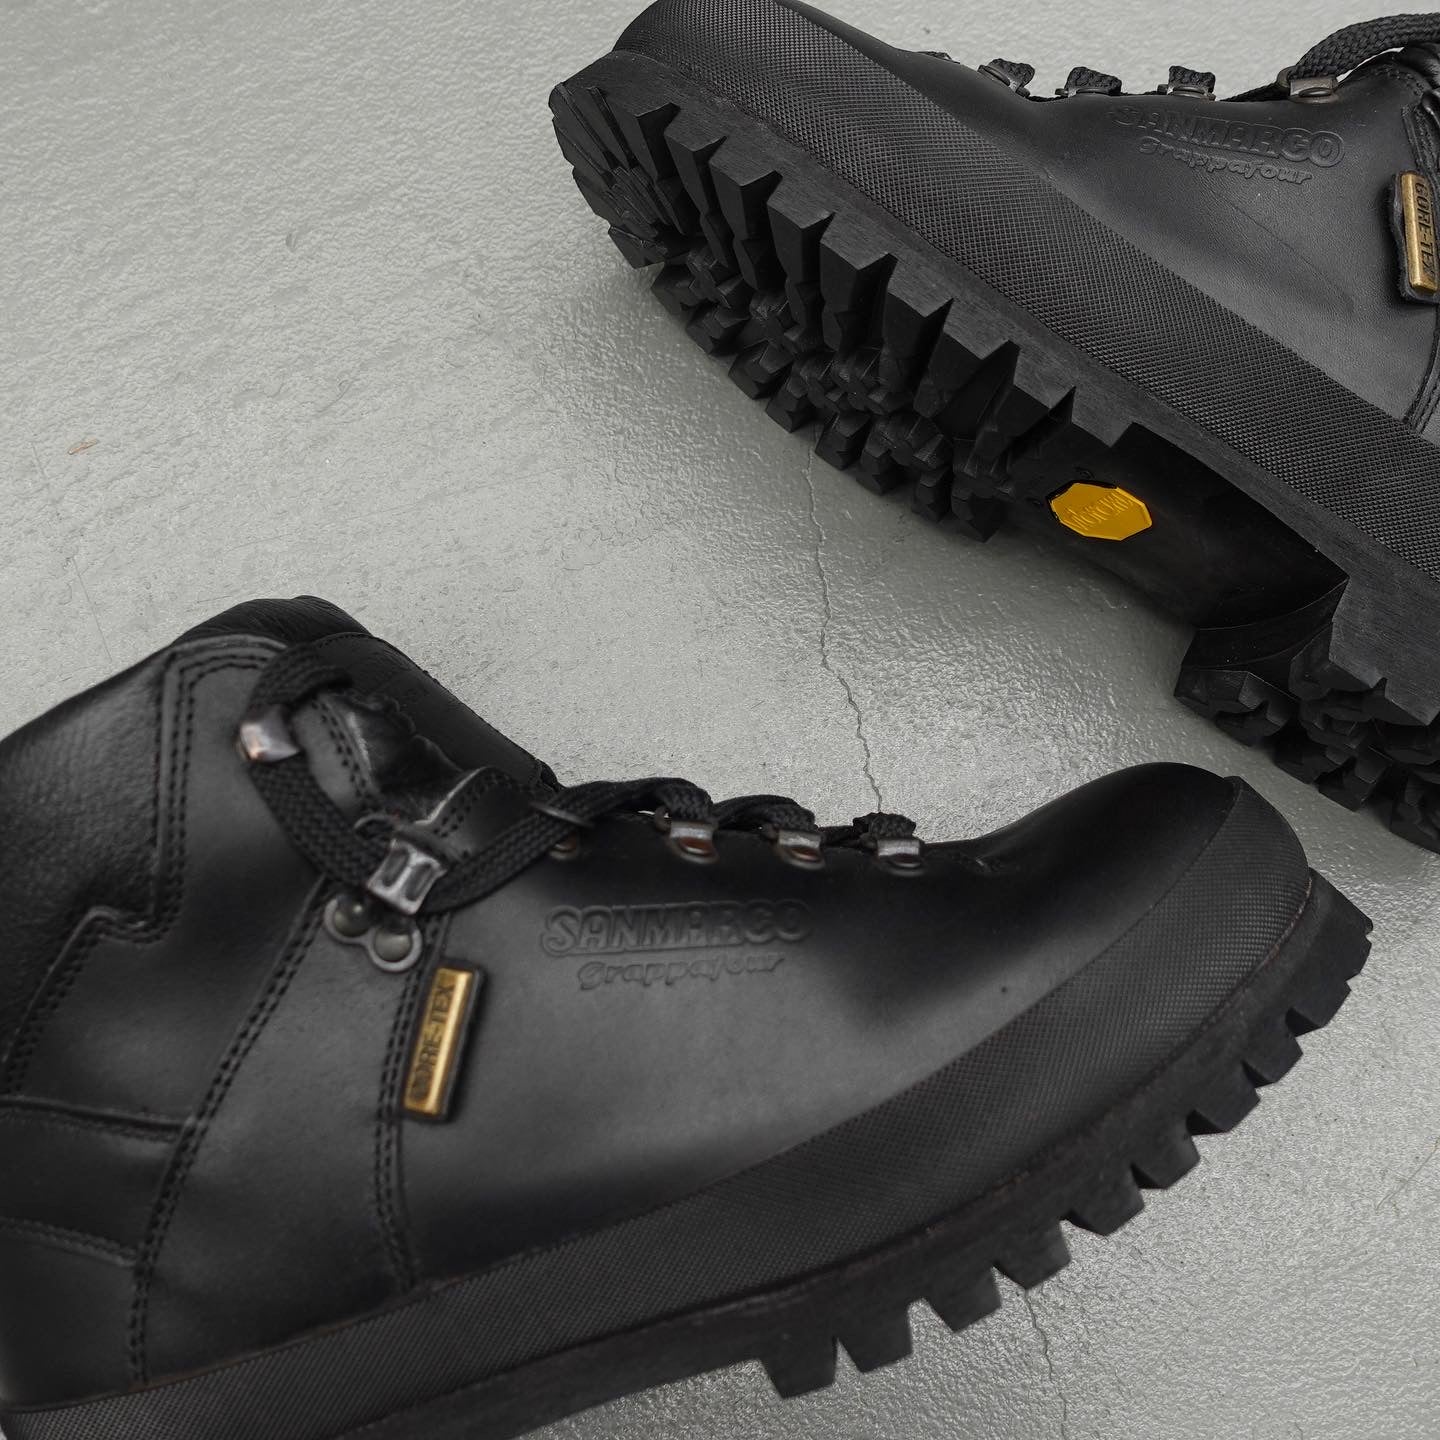 SANMARCO GORE-TEX Leather Boots